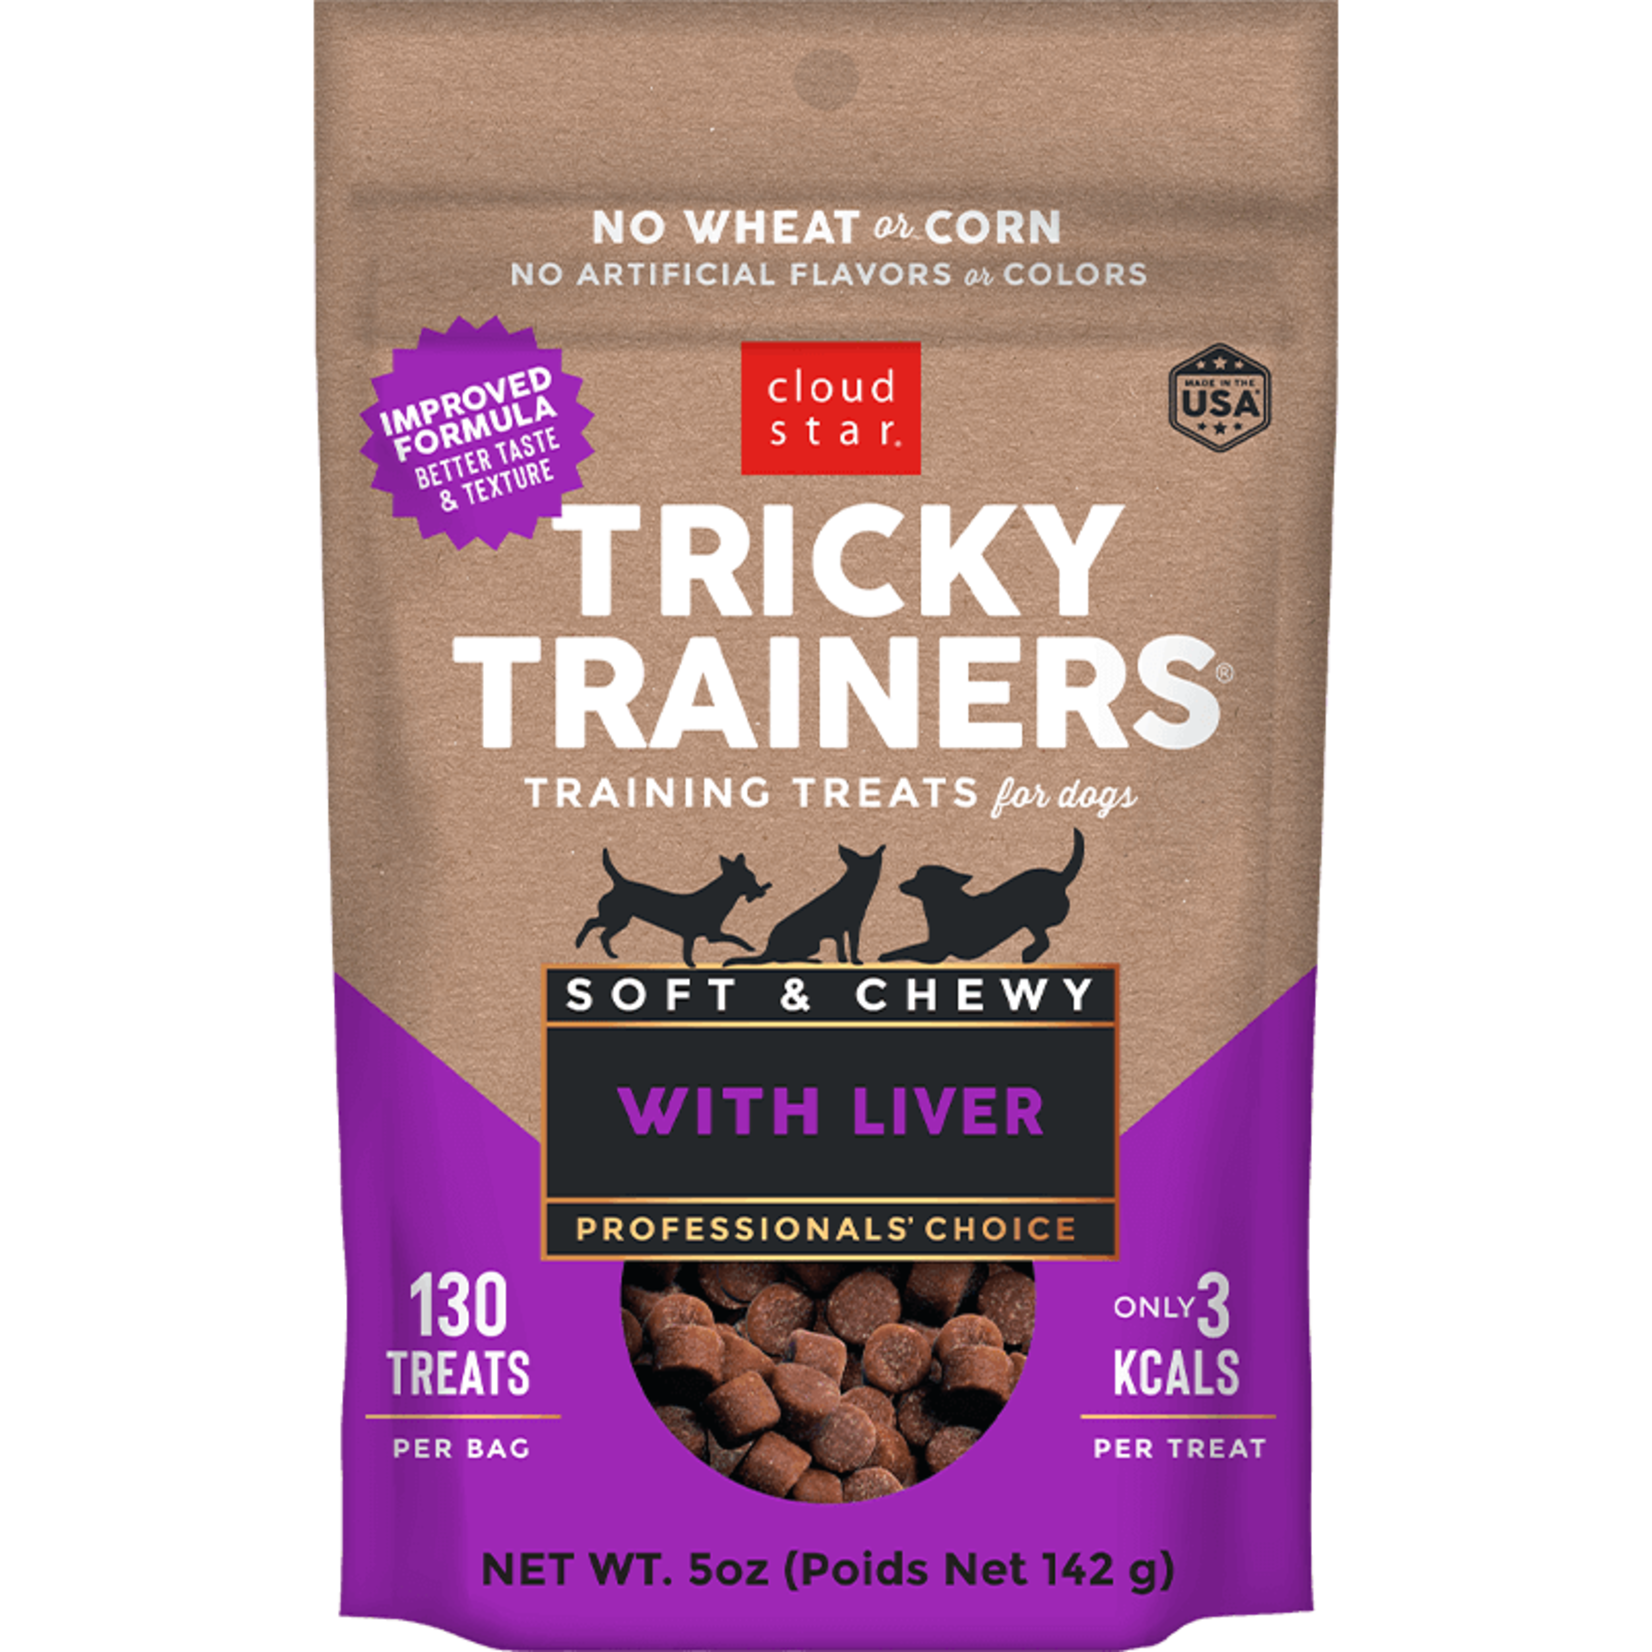 Cloud Star Tricky Trainers Liver Chewy Dog Treats